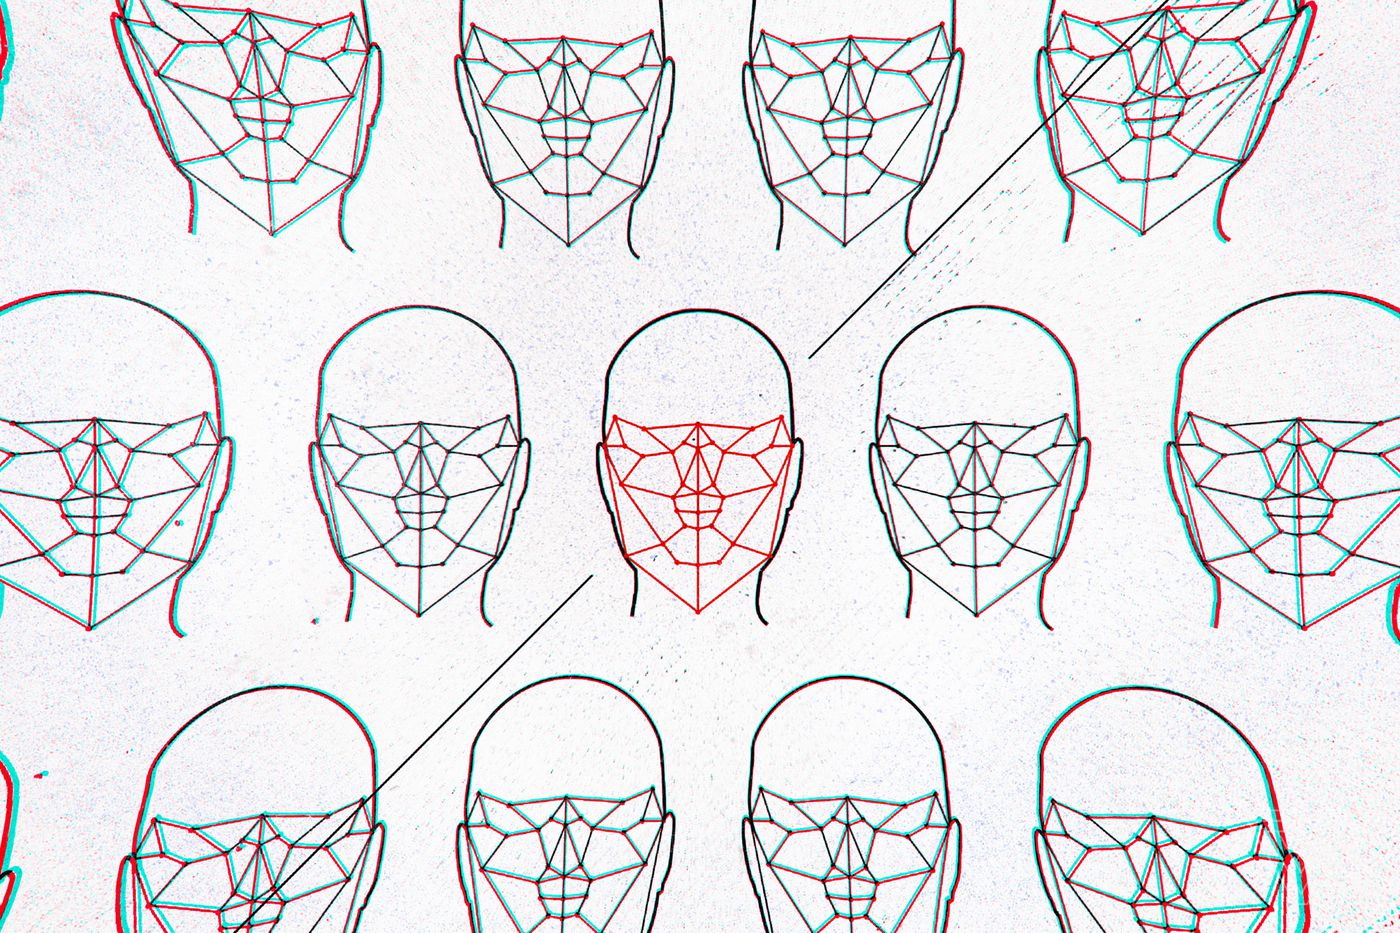 Header image from Alex Castro at The Verge, illustrating silhouettes of human faces with computer-drawn polygons.